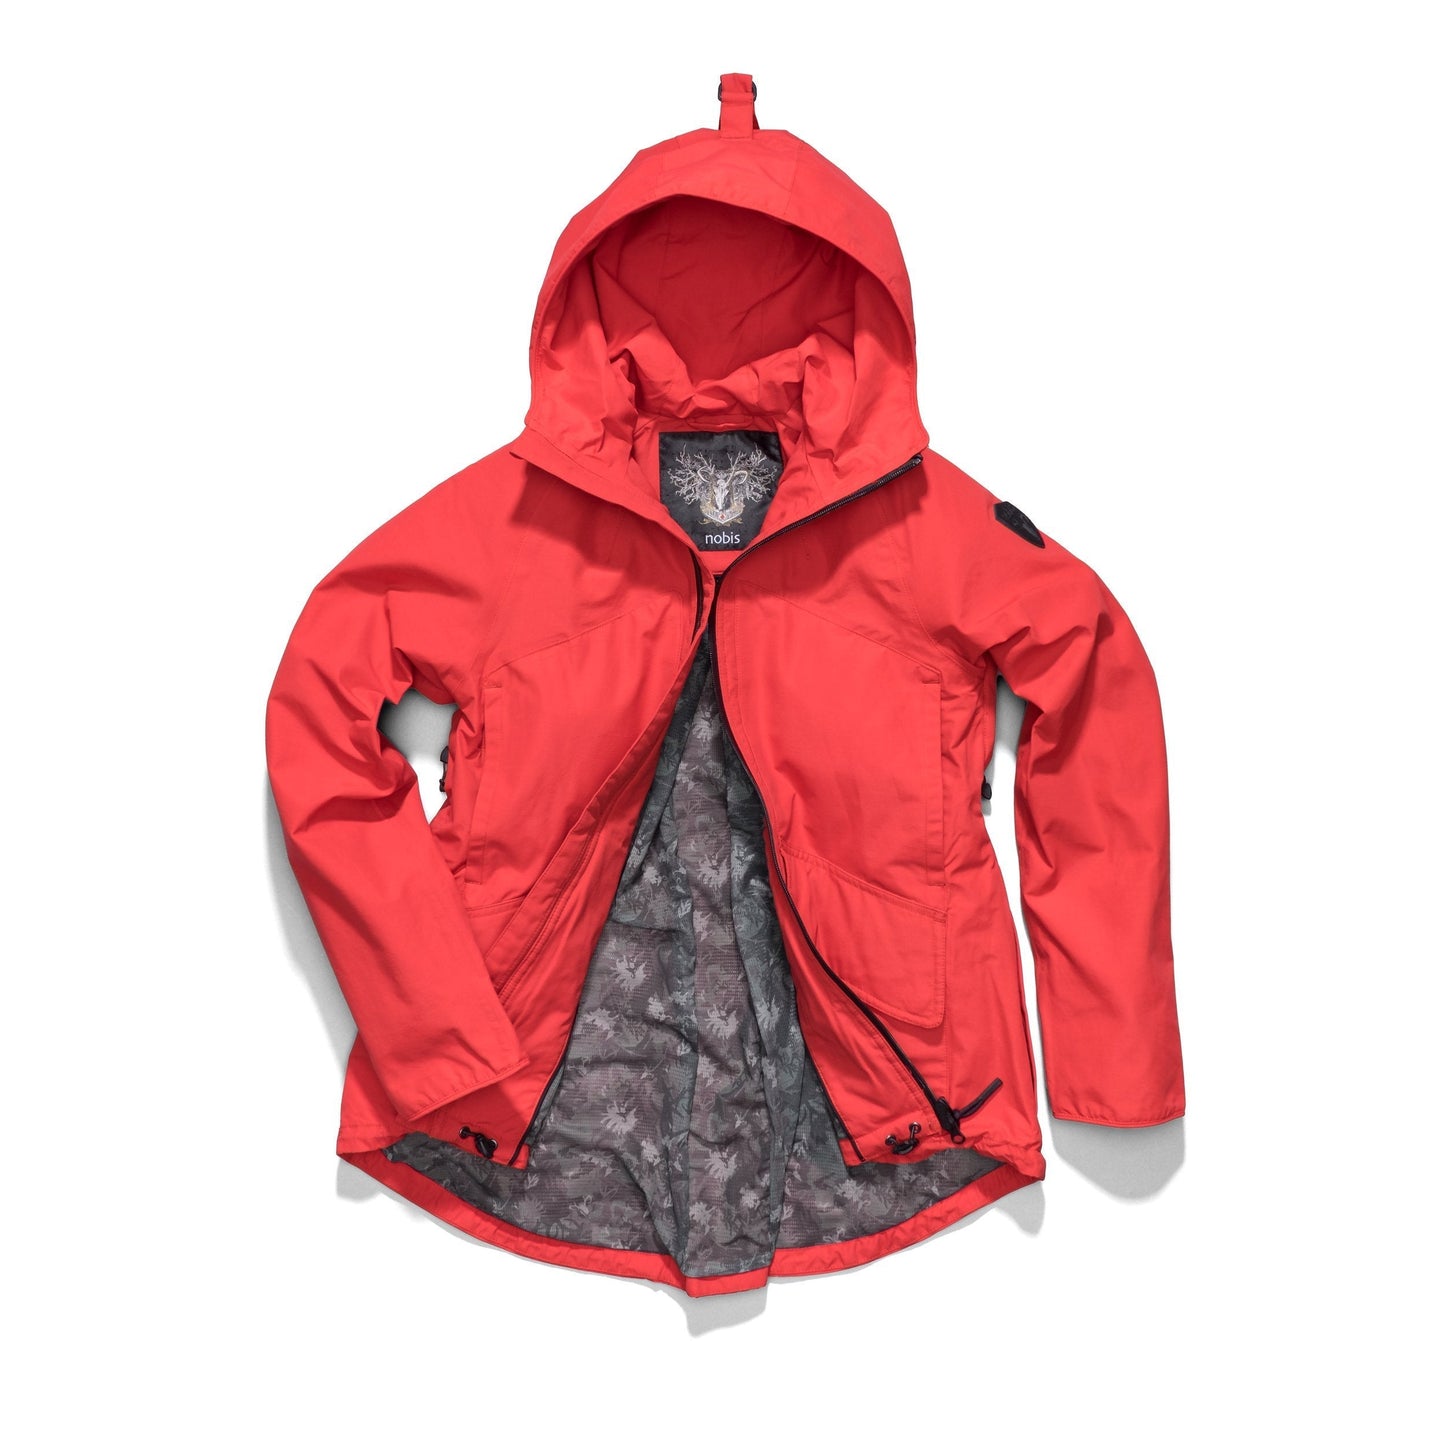 Women's hooded rain jacket with high low hem in Red